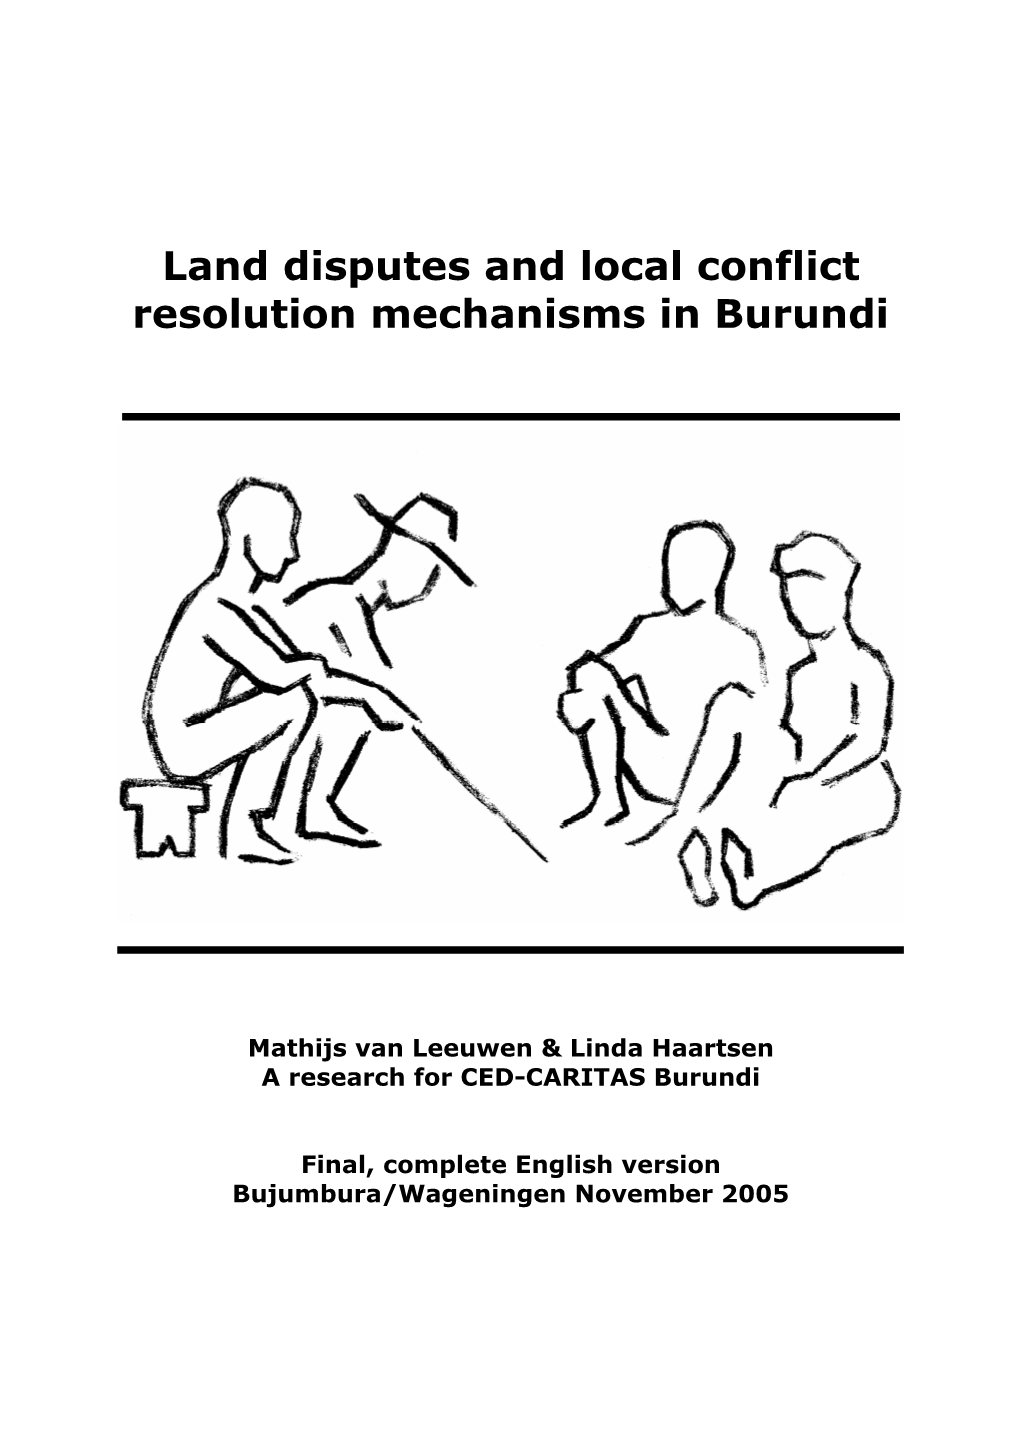 Land Disputes and Local Conflict Resolution Mechanisms in Burundi